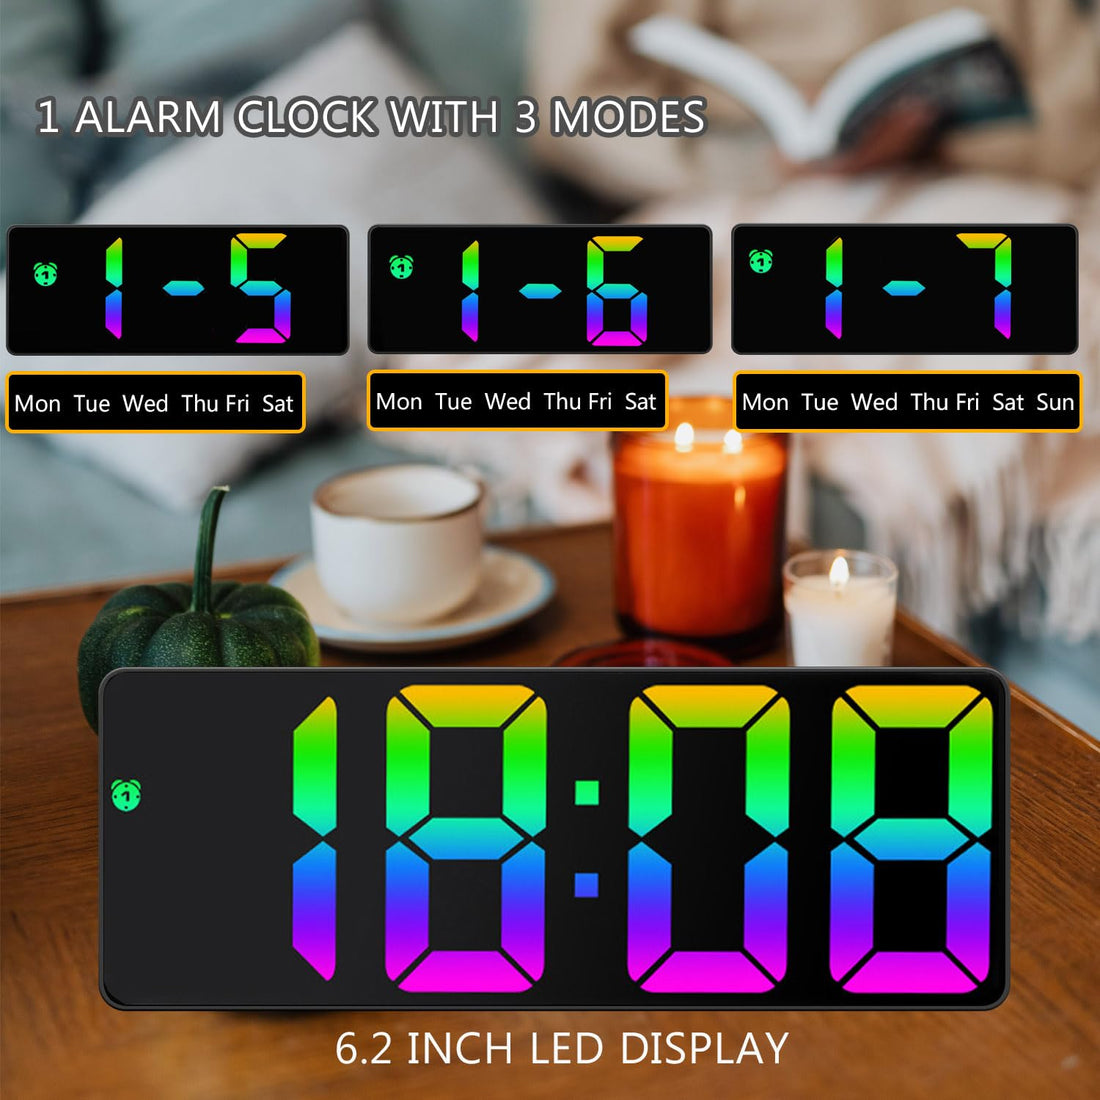 Yaboodn Alarm Clock for Bedrooms, 6.5 inch HD Display with Colorful Digits, 3 Levels Brightness Adjustable Desk (Multicolor)